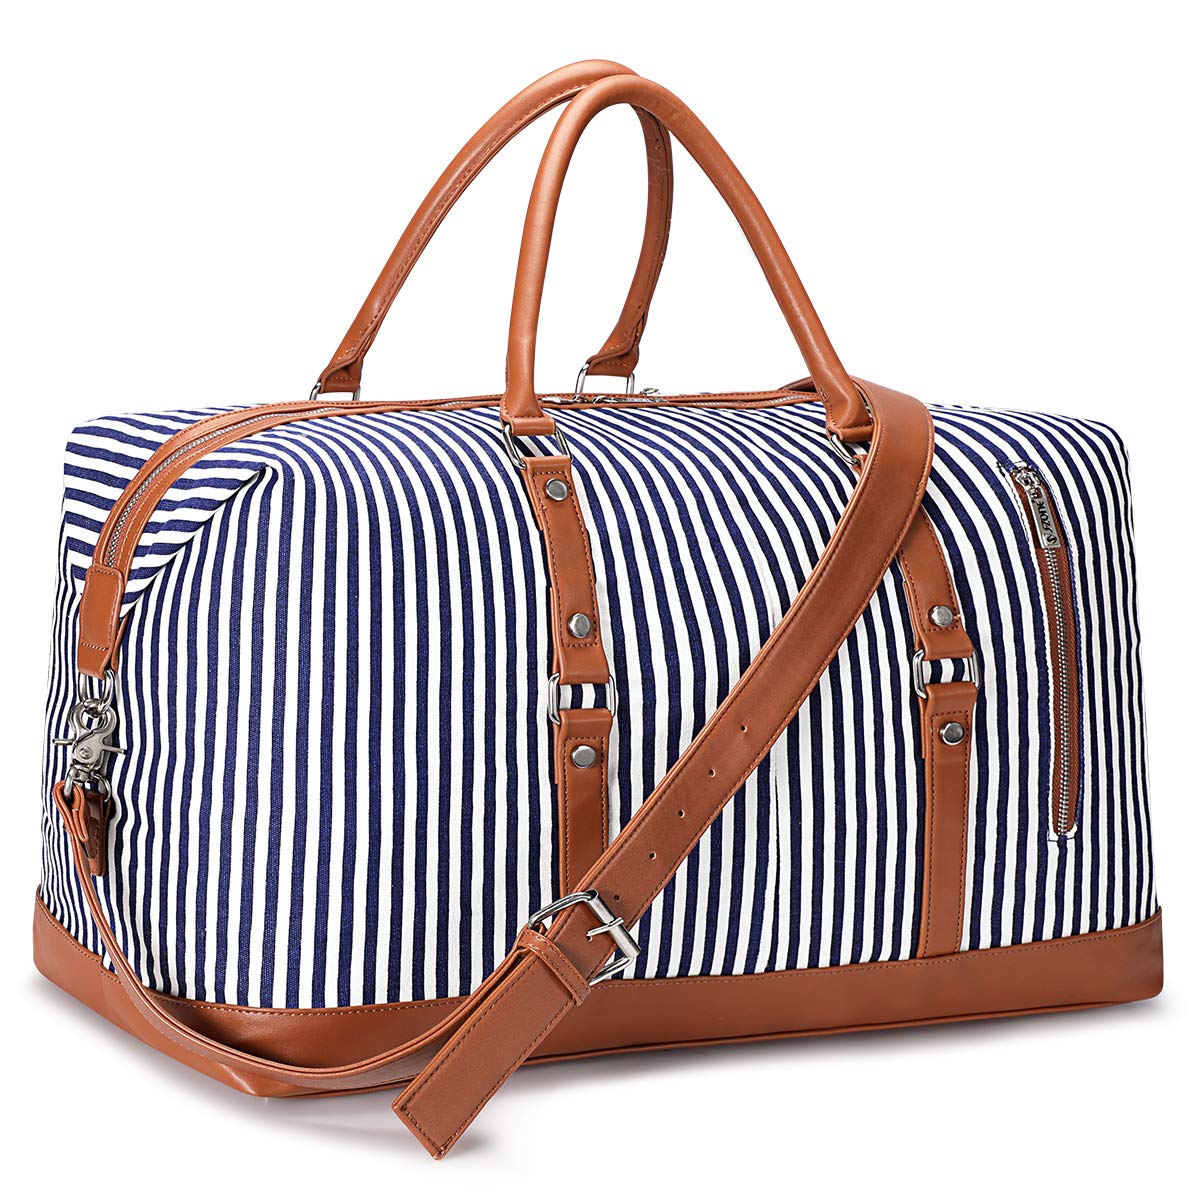 Efficient Packing Made Easy: Men’s Canvas Duffel Bags with Smart Design post thumbnail image